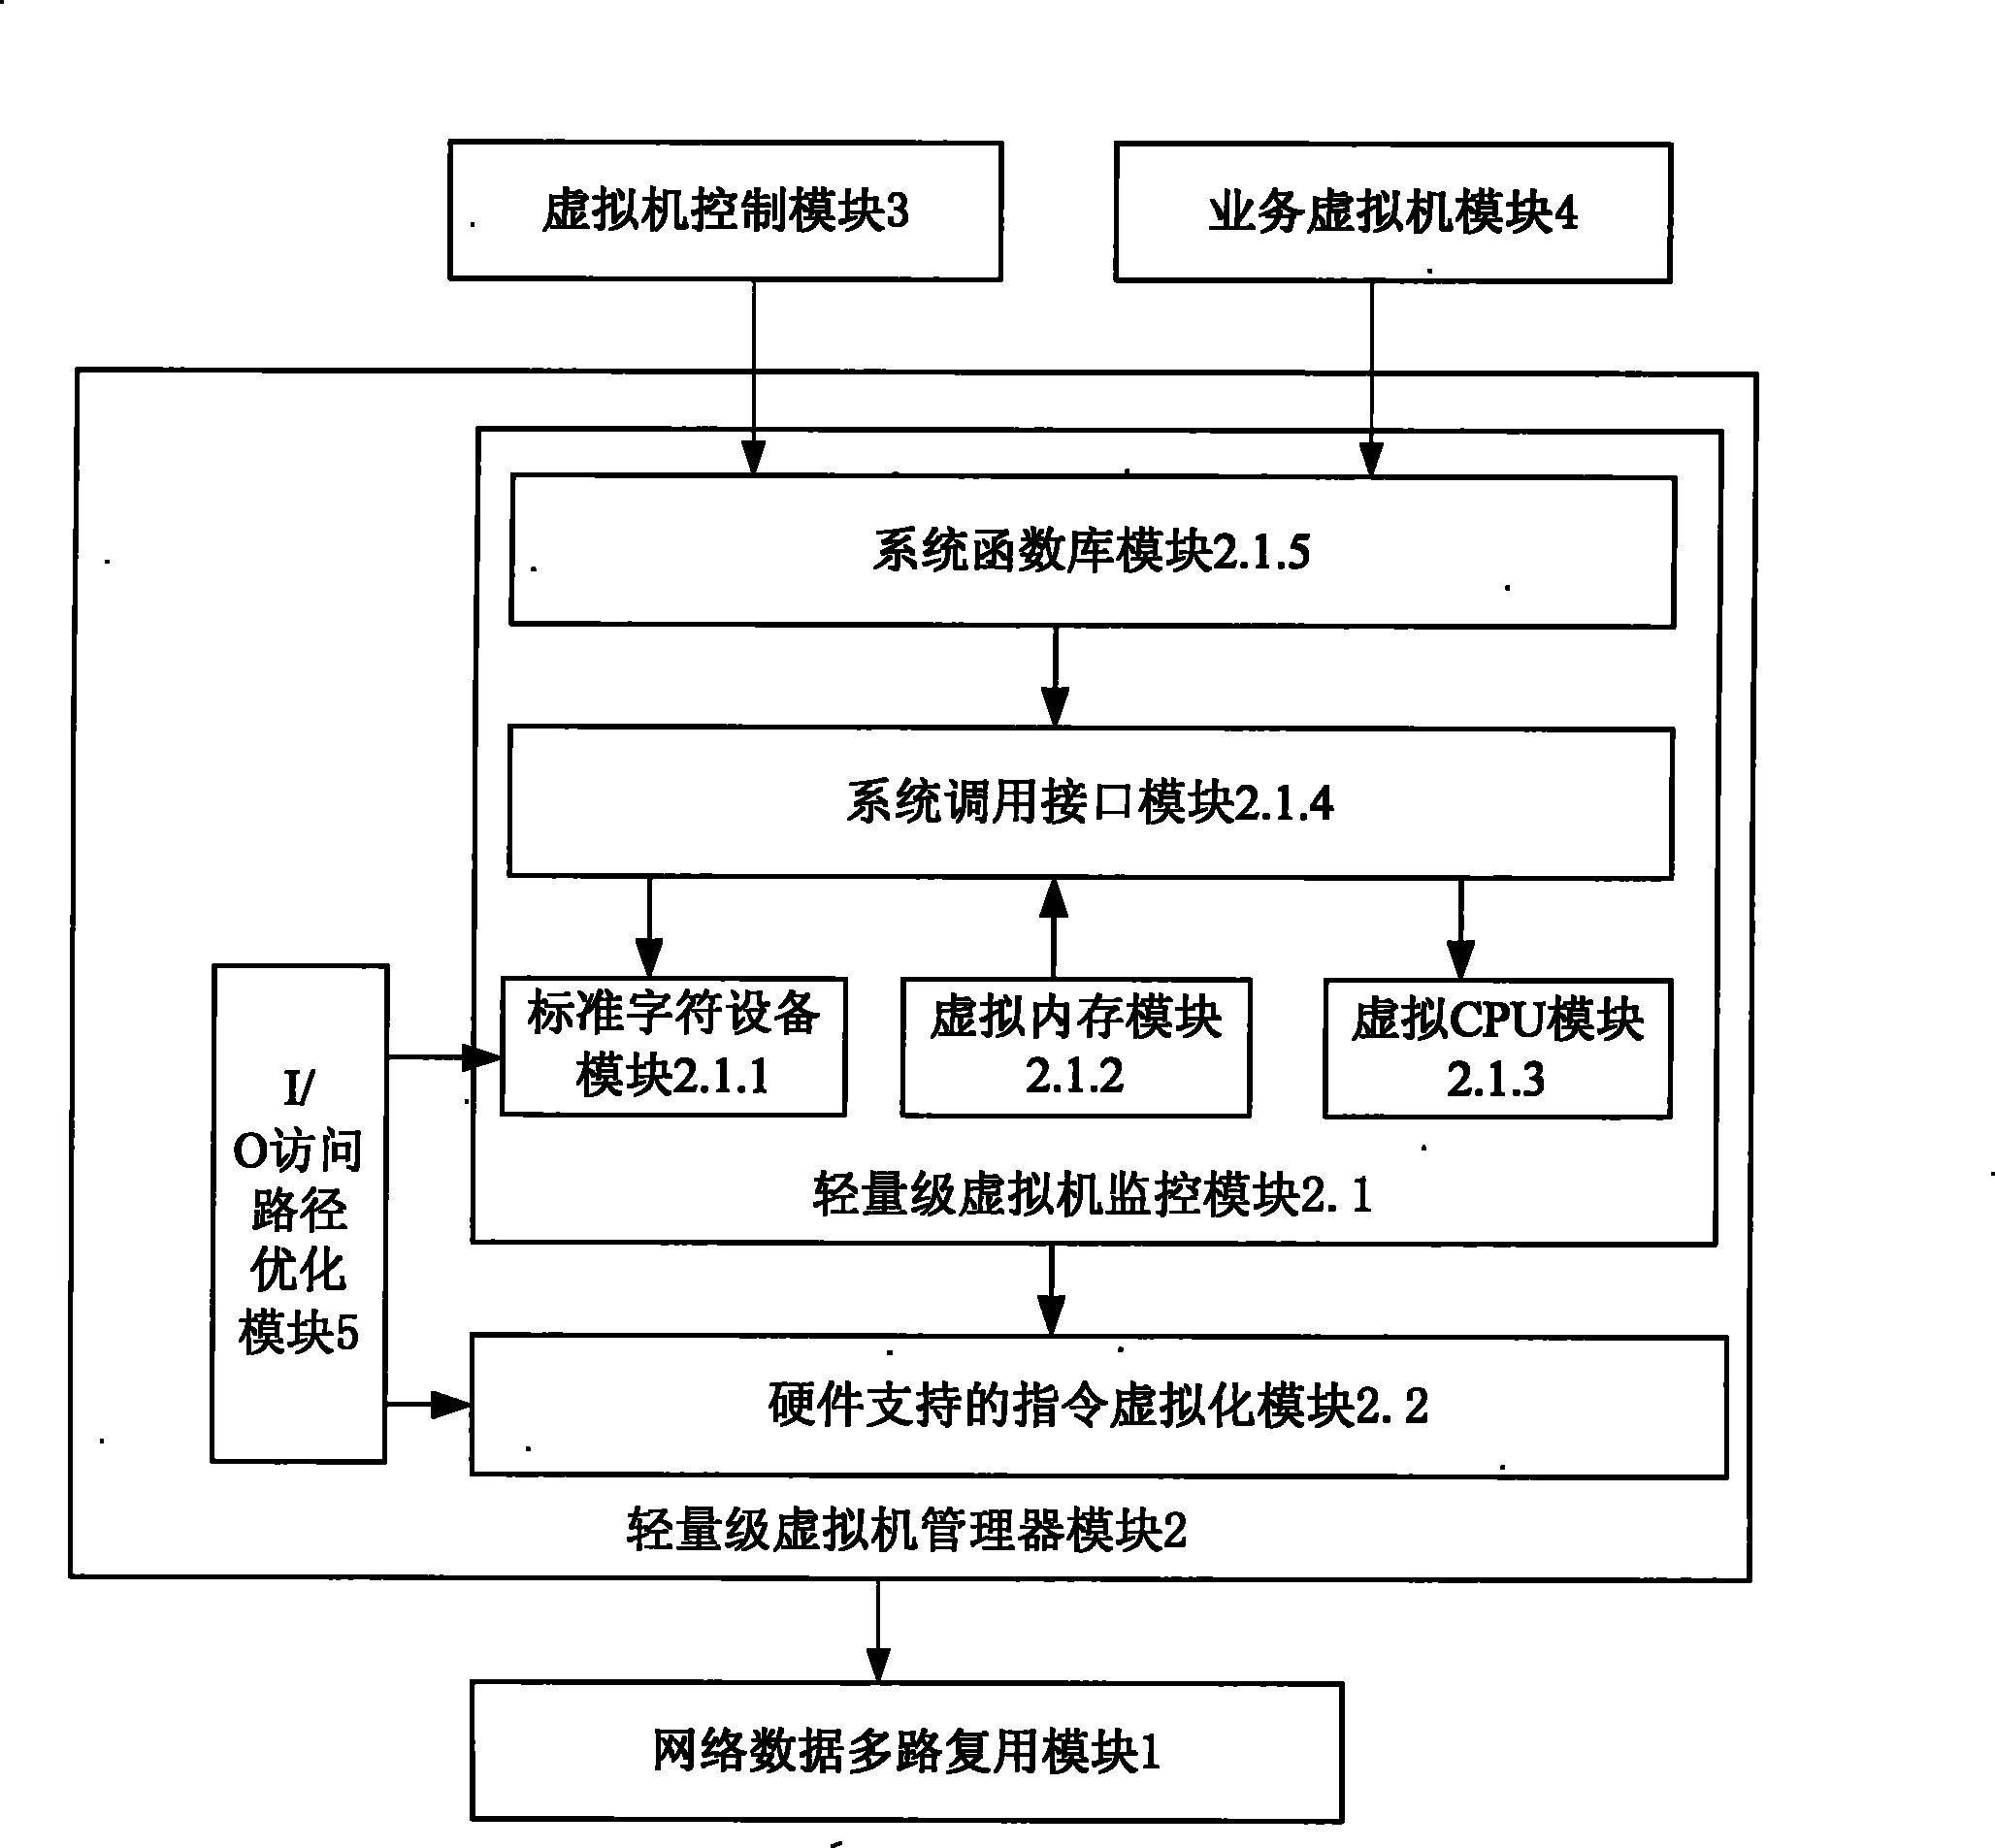 Network monitoring and analysis system under virtual machine circumstance